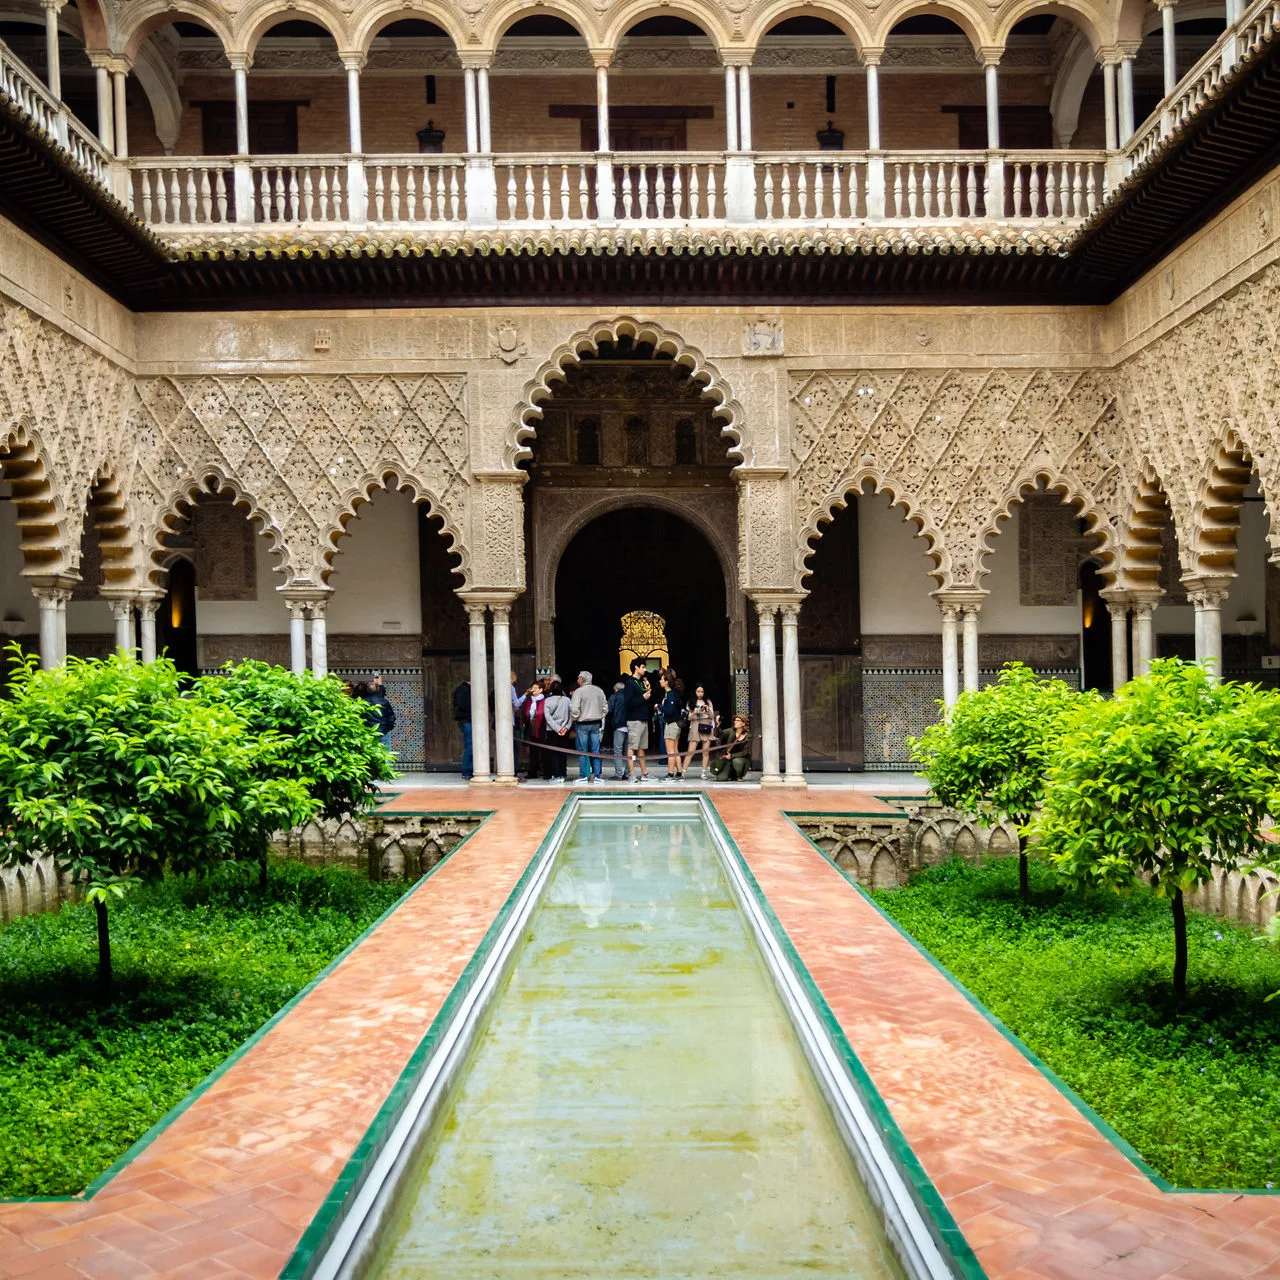 Real Alcázar
Itinerary of Southern Spain